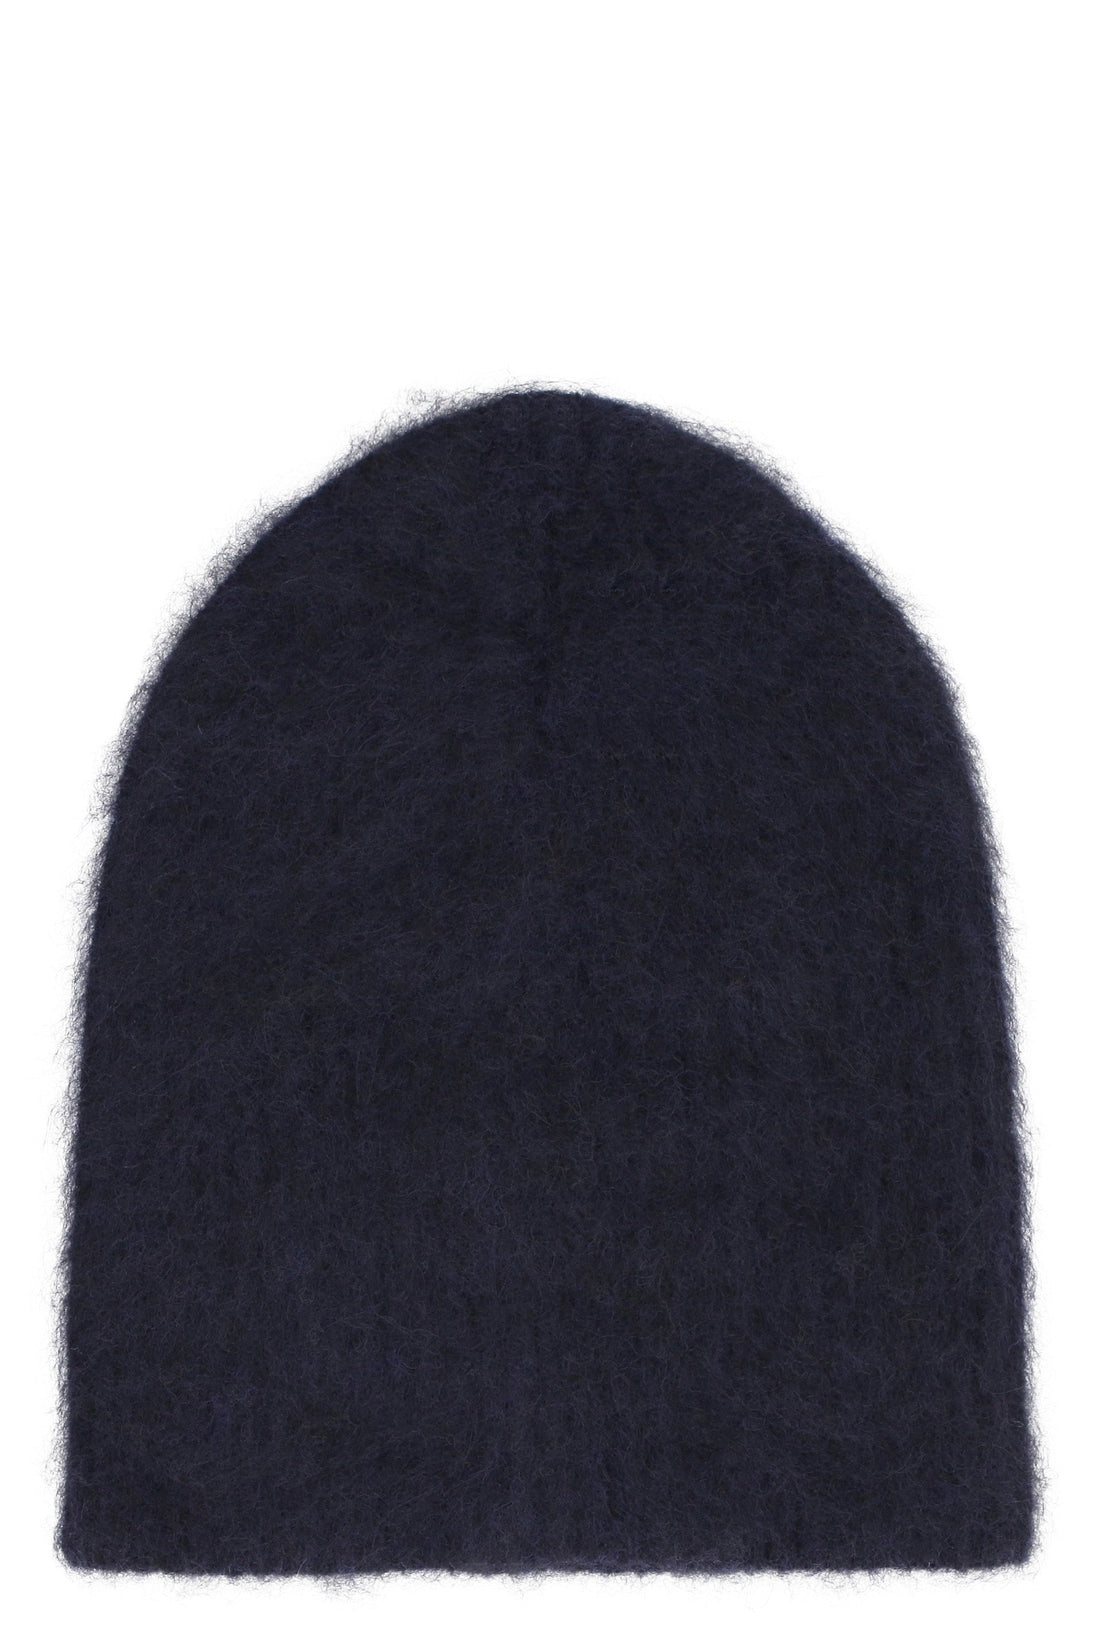 Roberto Collina-OUTLET-SALE-Knitted hat-ARCHIVIST